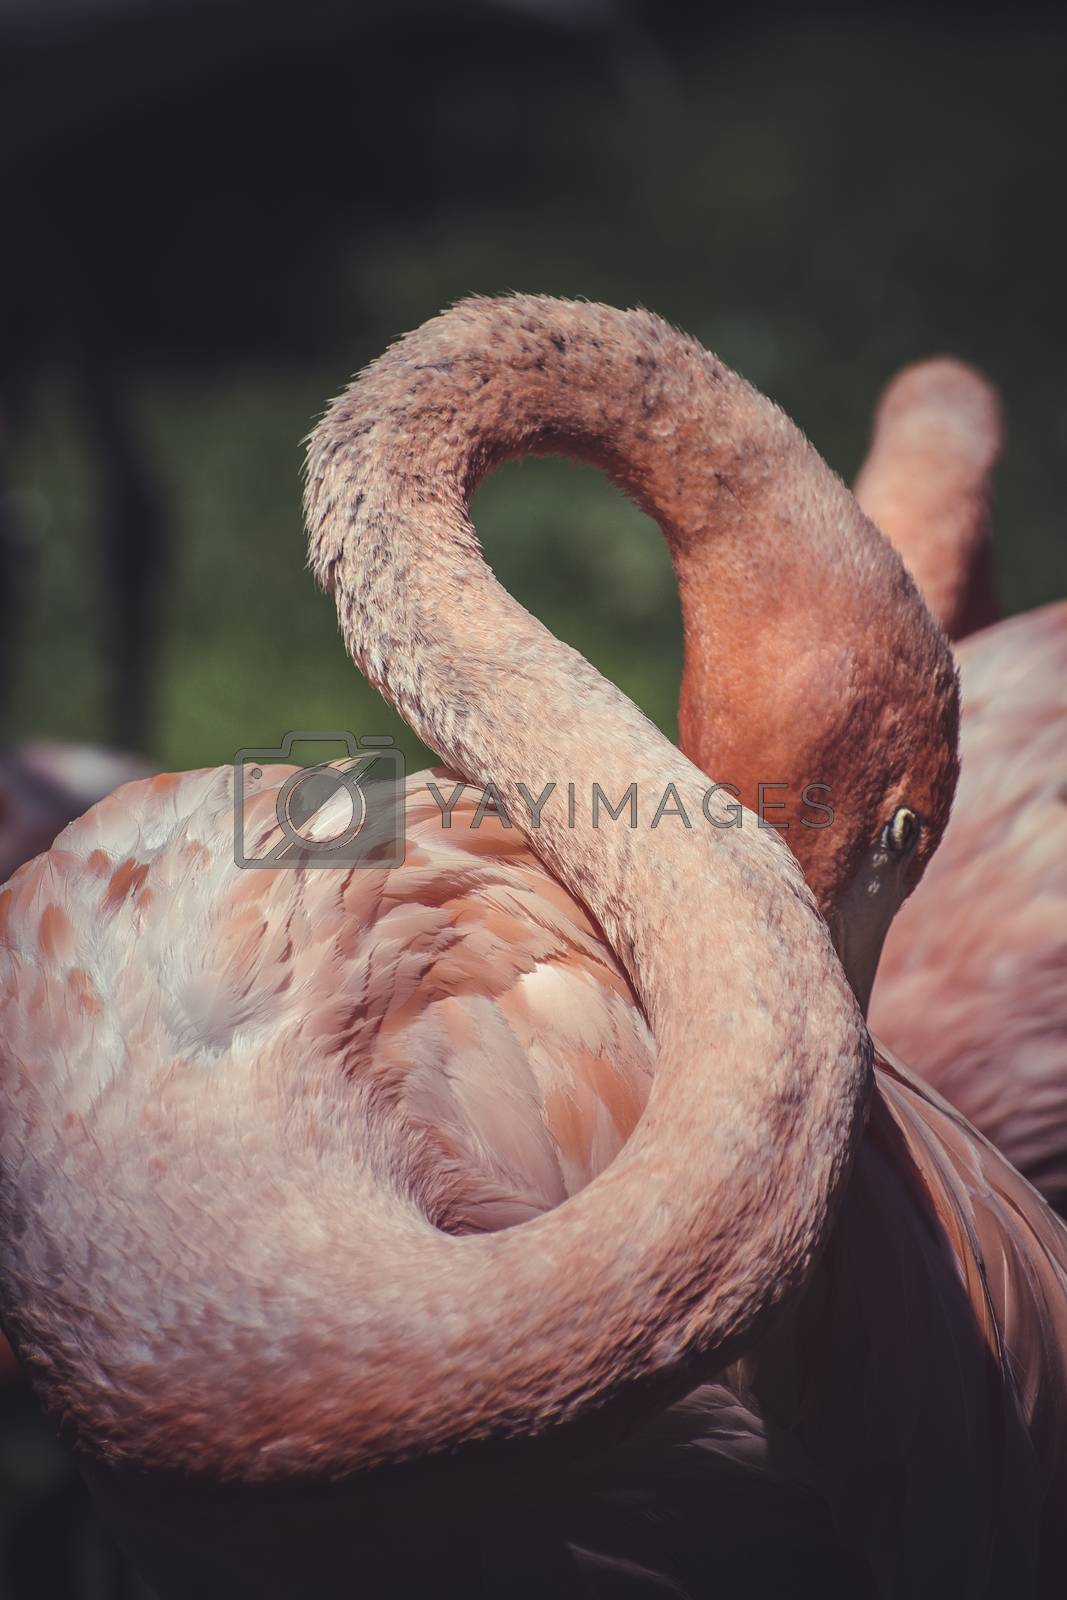 Royalty free image of detail of flamingo head with long neck by FernandoCortes